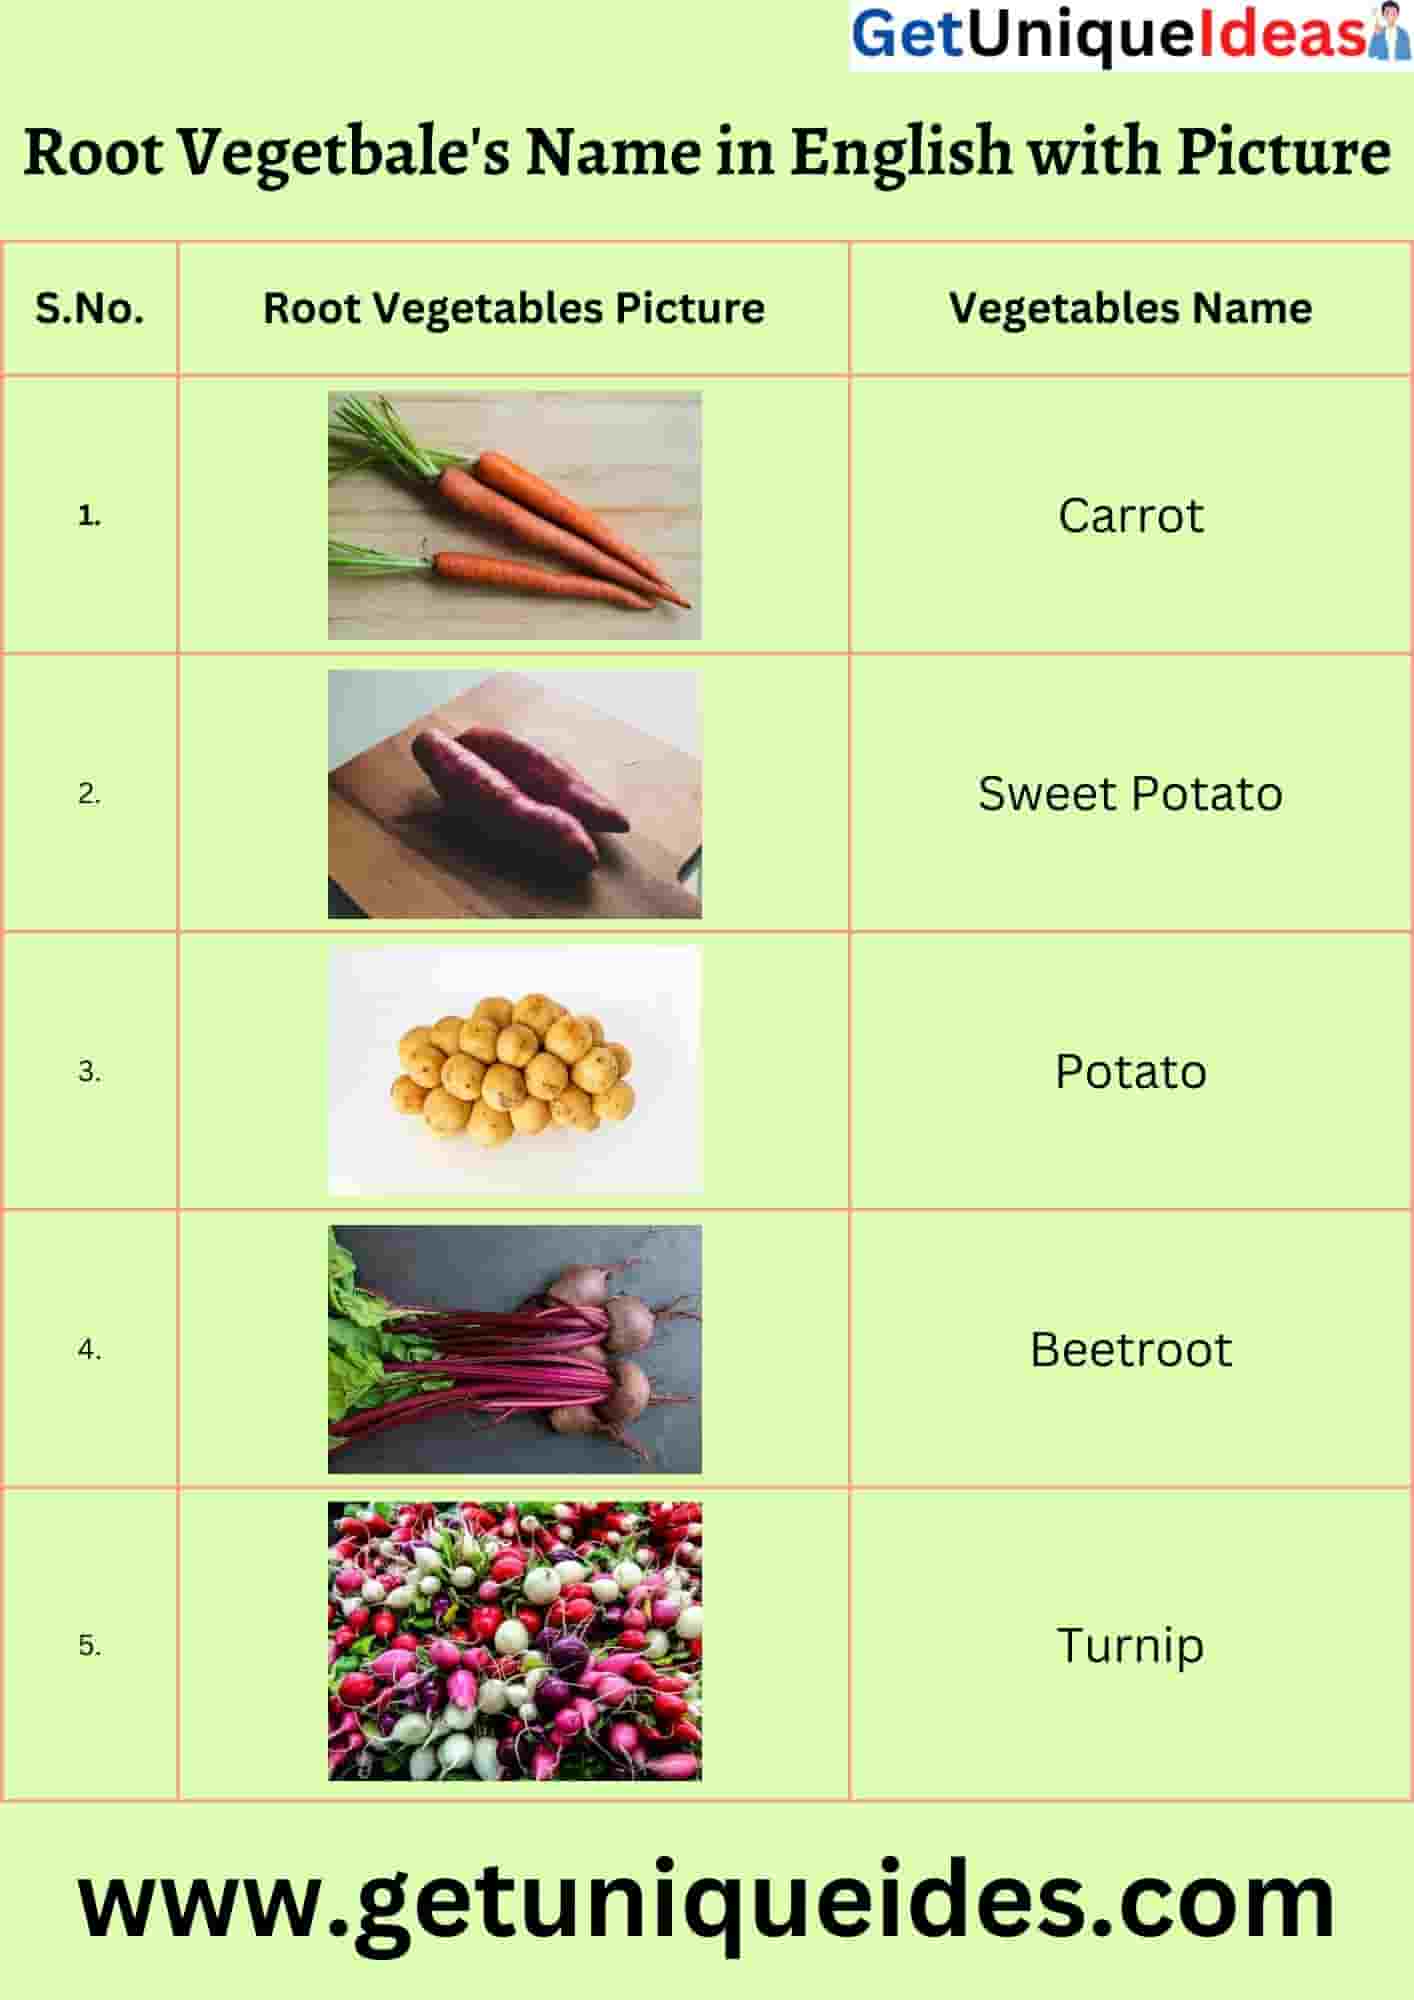 Root Vegetables Name in English